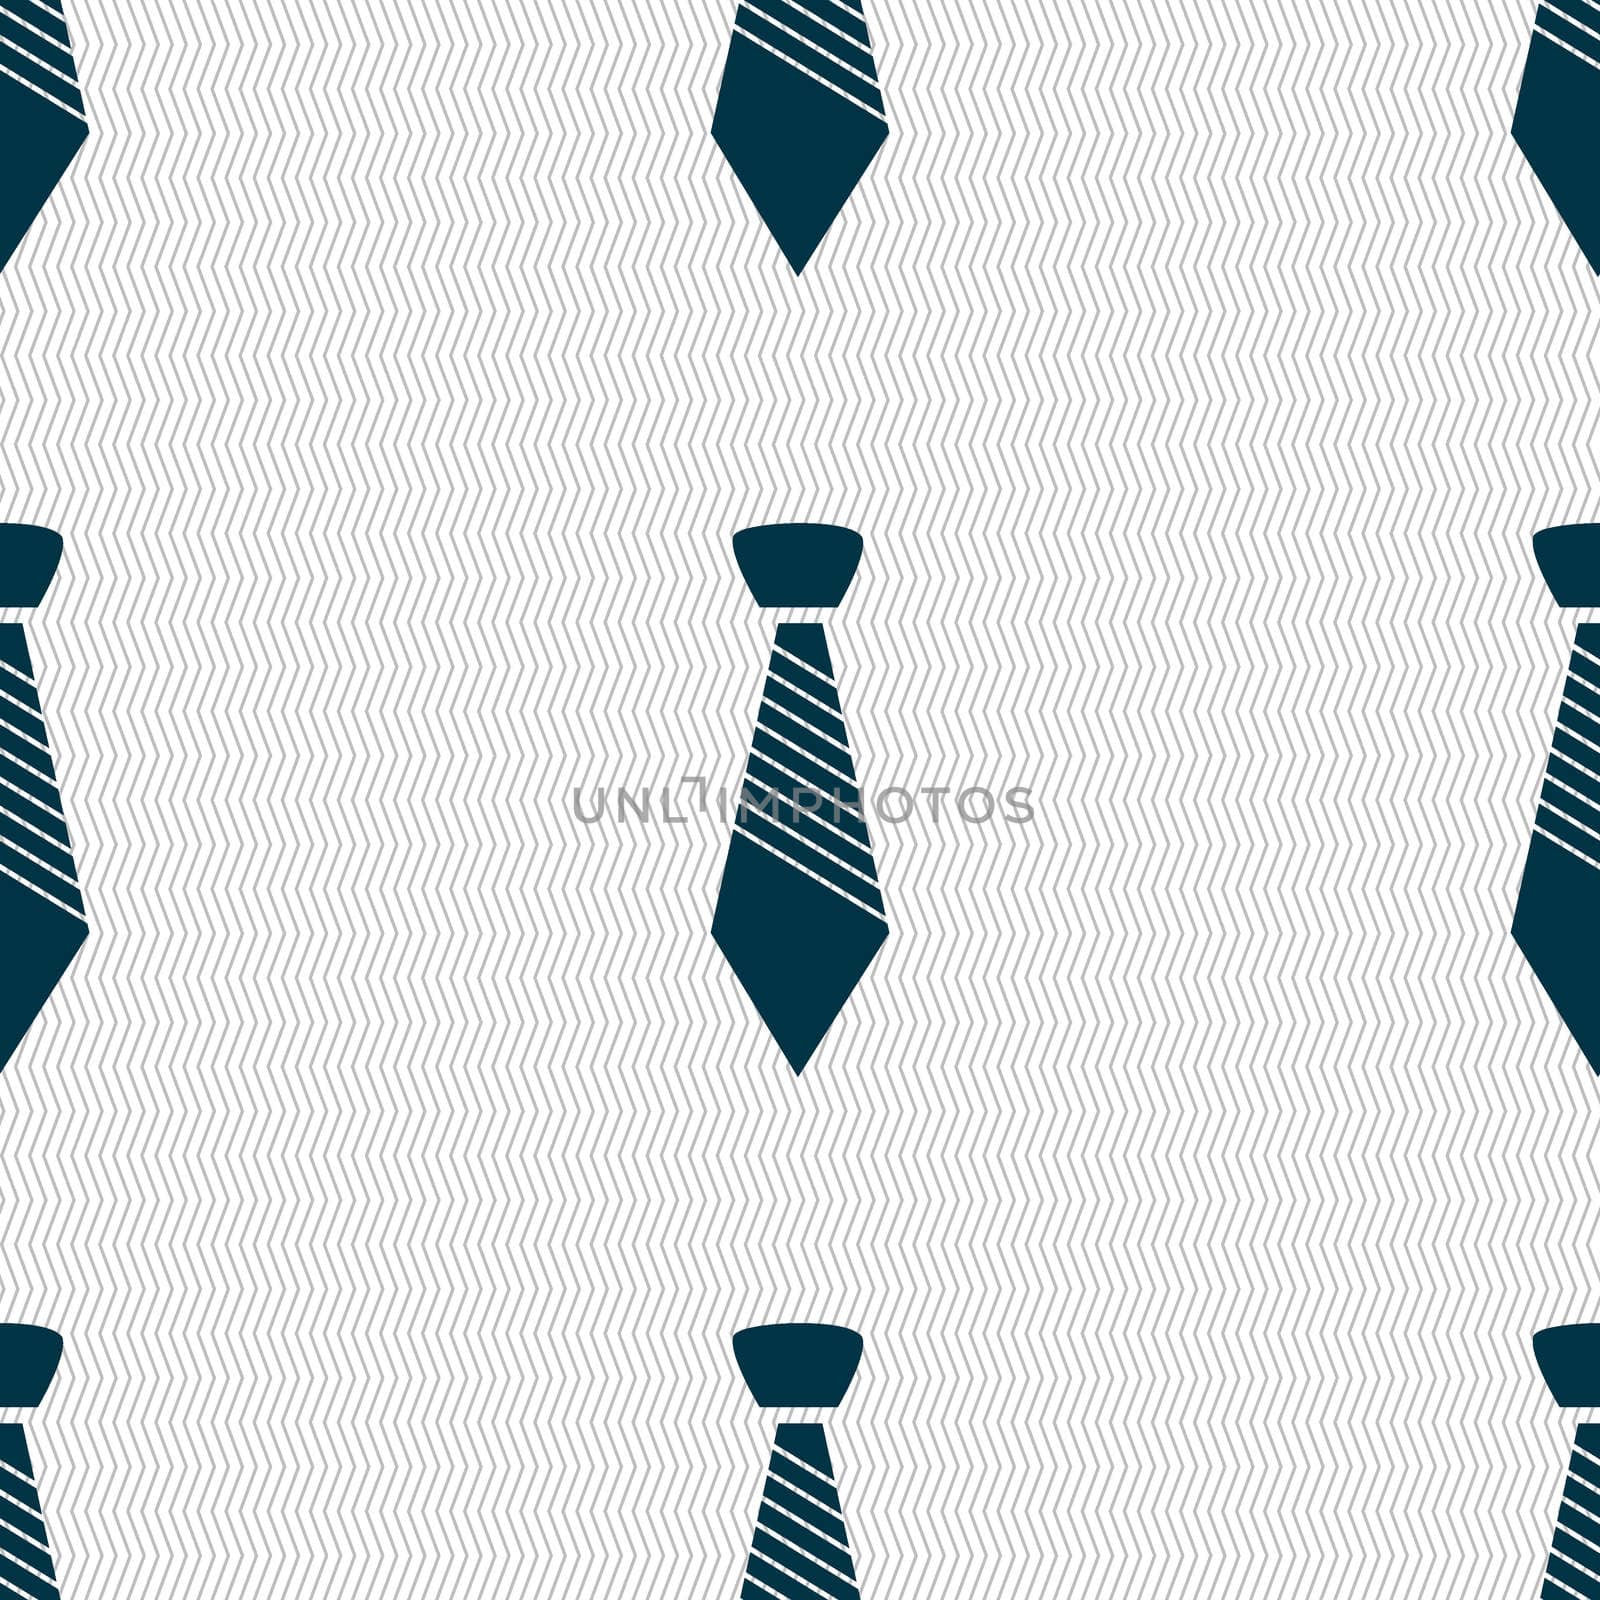 Tie sign icon. Business clothes symbol. Seamless abstract background with geometric shapes. illustration